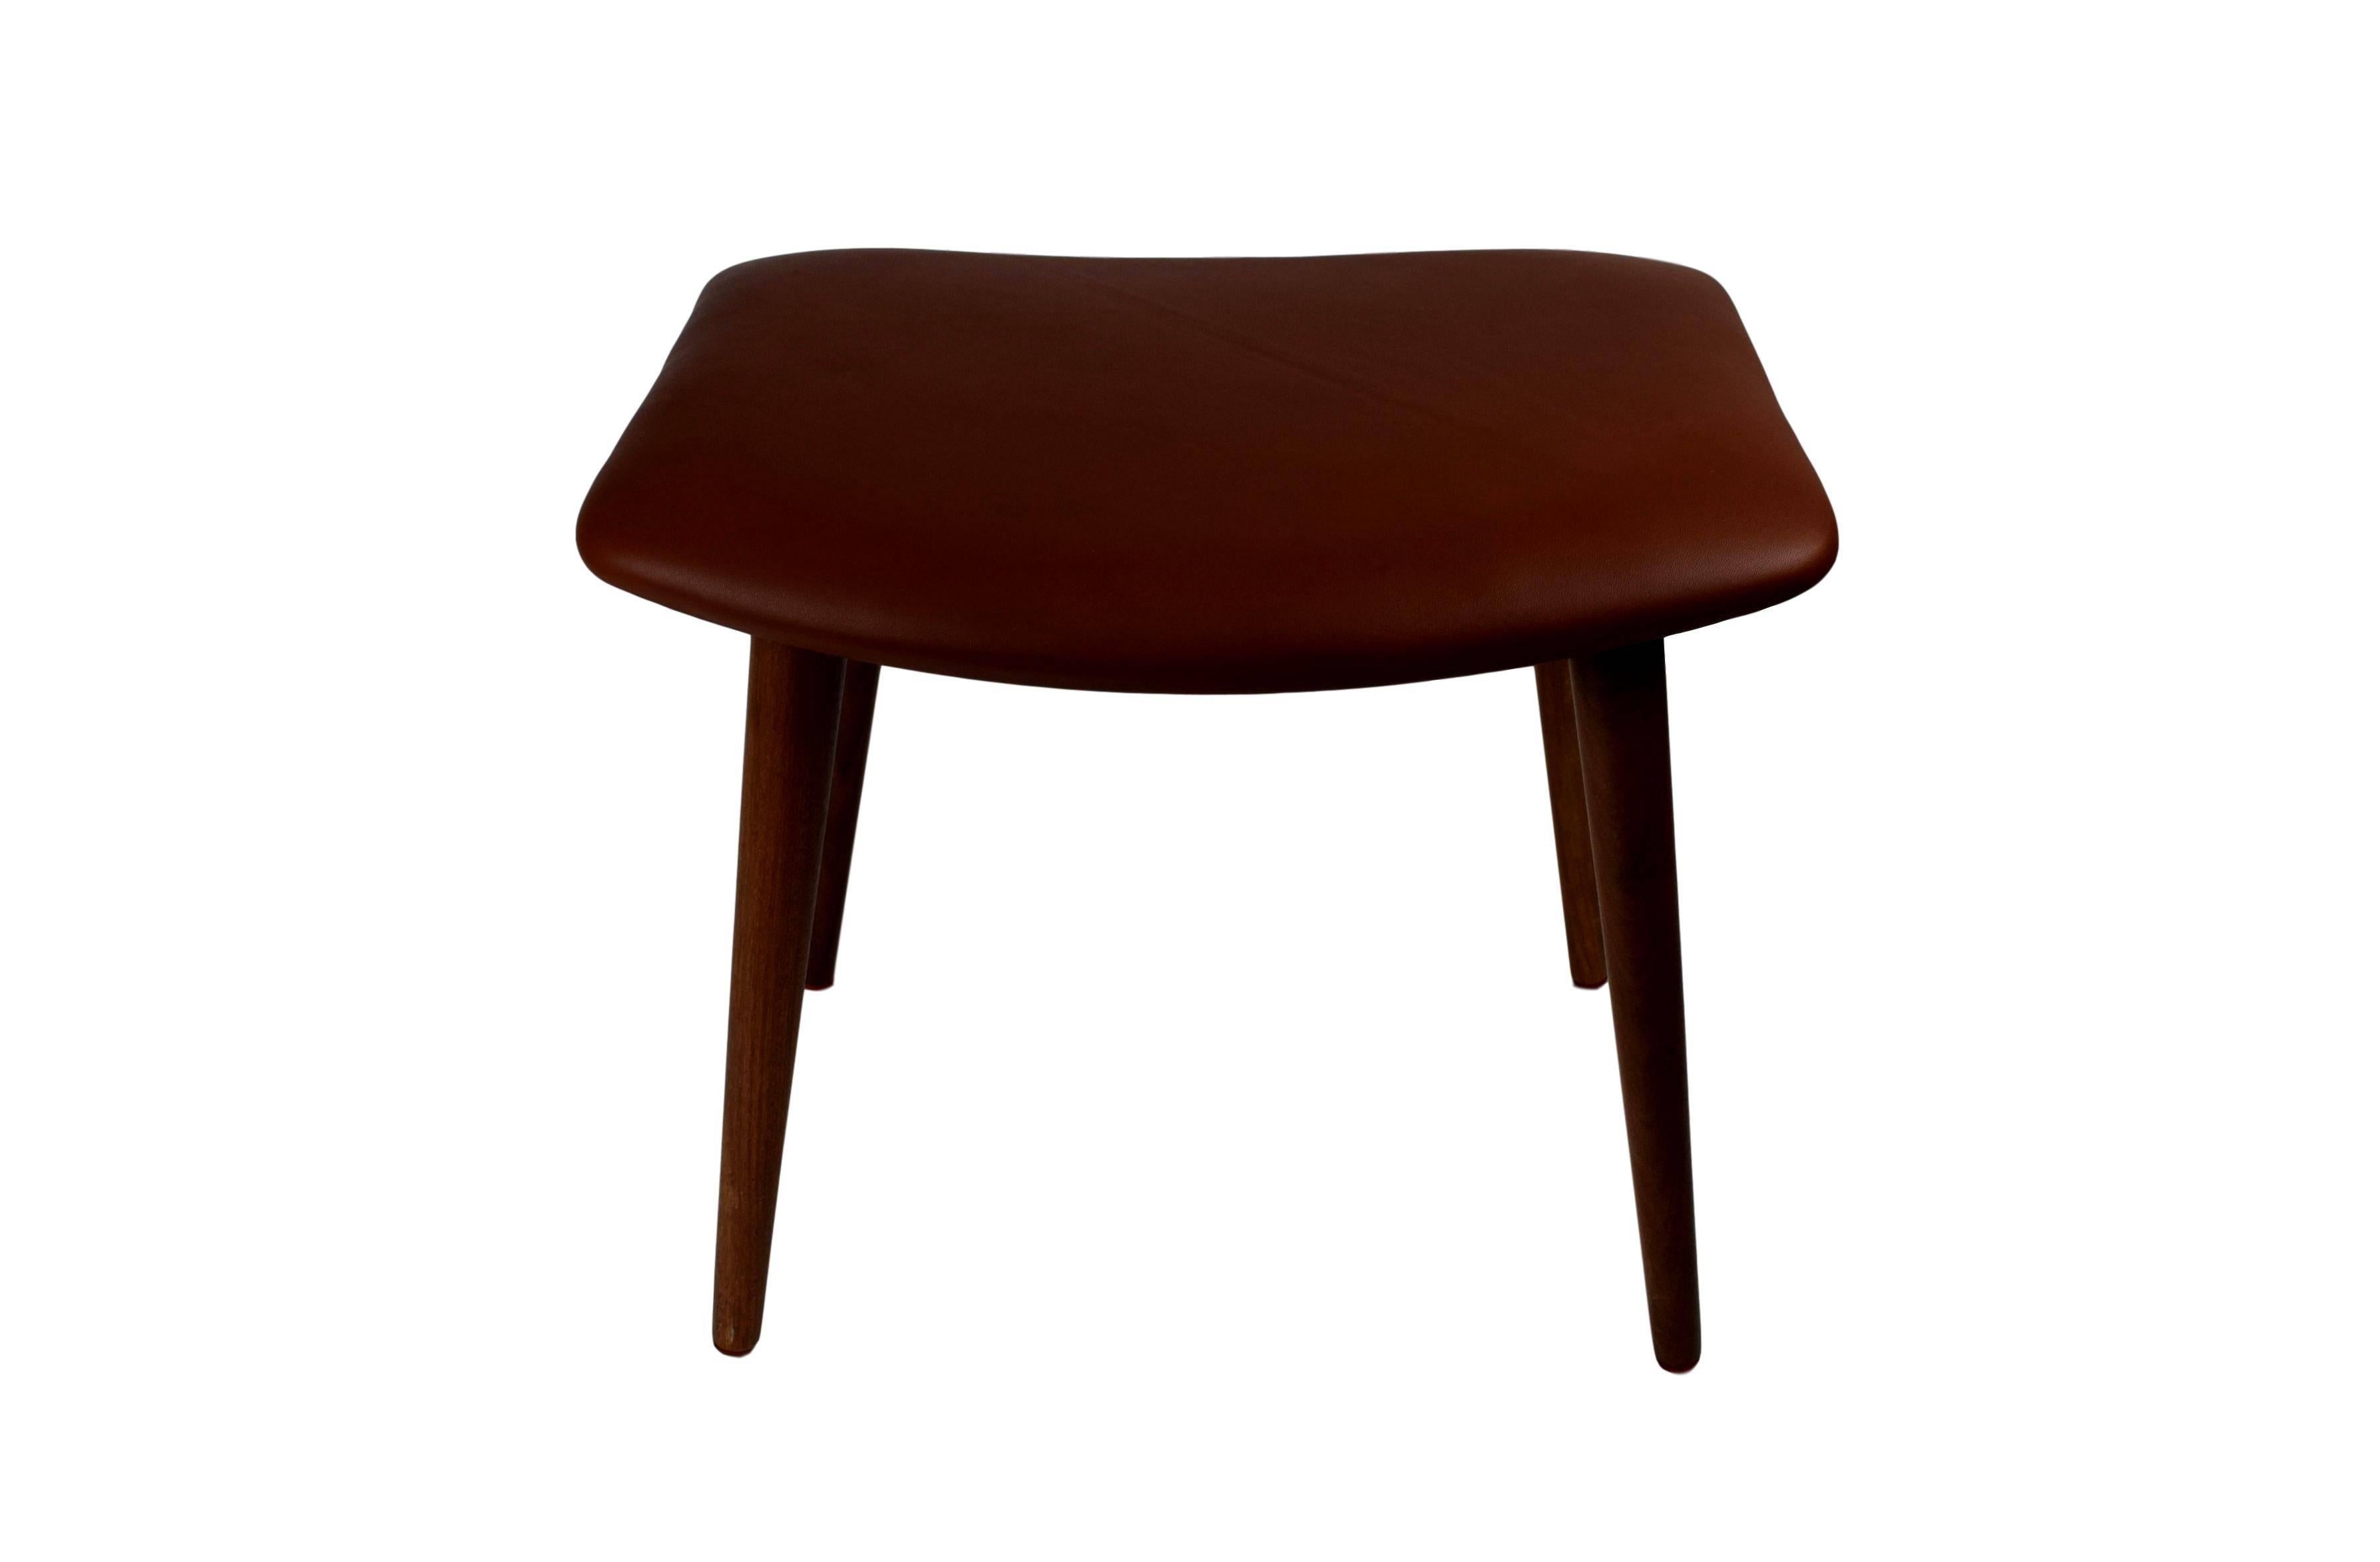 Danish Midcentury Teak Ottoman Upholstered with Brown Aniline Leather In Good Condition For Sale In Denmark, DK